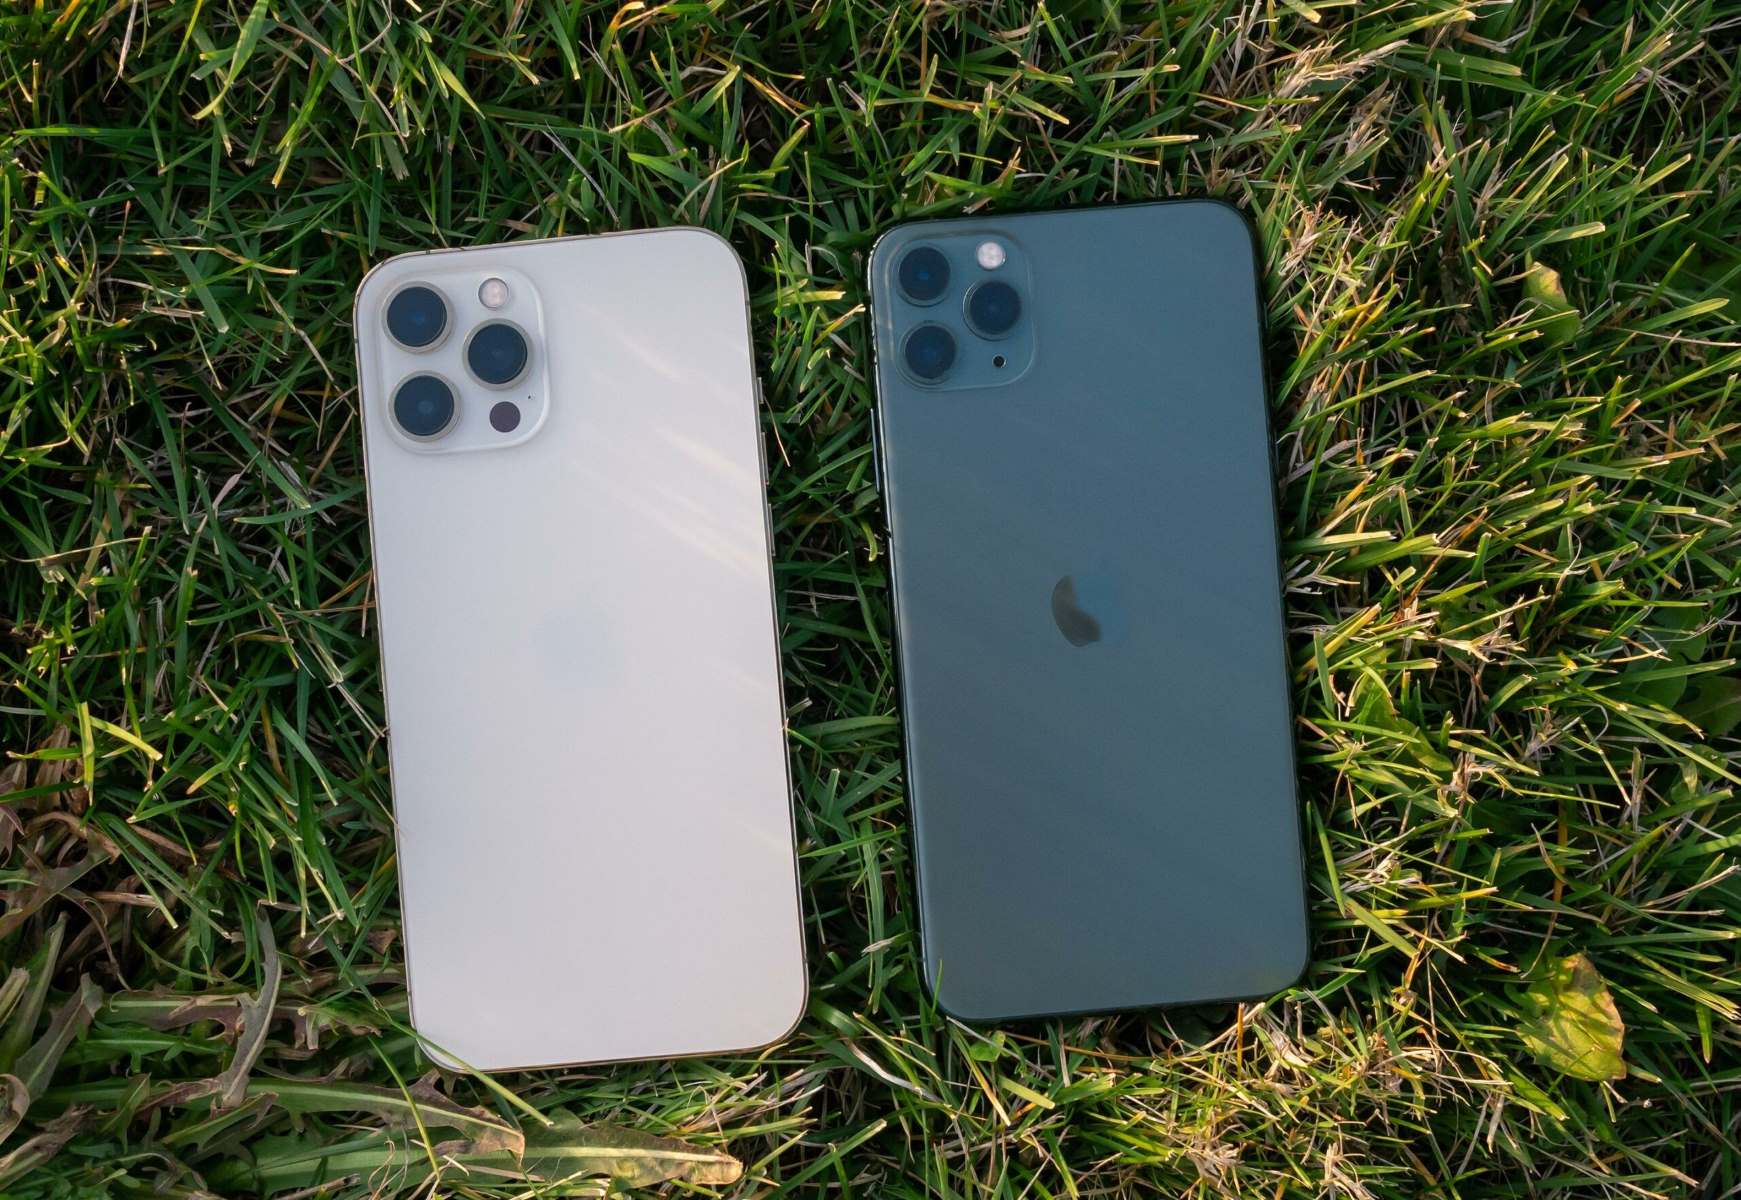 IPhone 11 Pro Max Vs. IPhone 12 Pro Max: Highlighting Key Differences